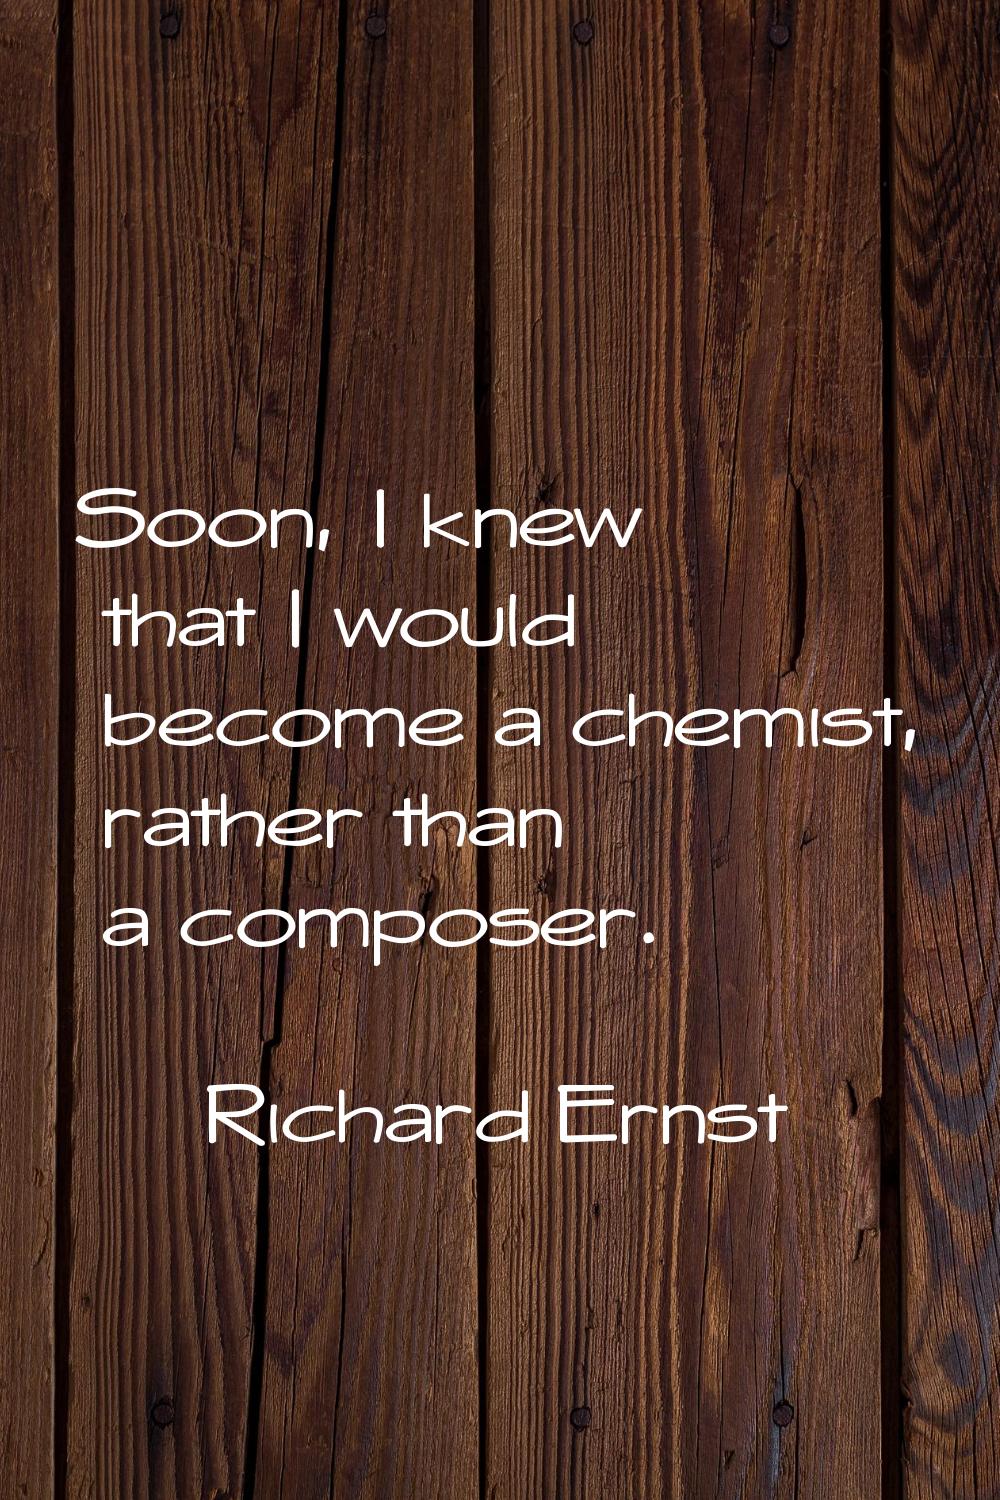 Soon, I knew that I would become a chemist, rather than a composer.